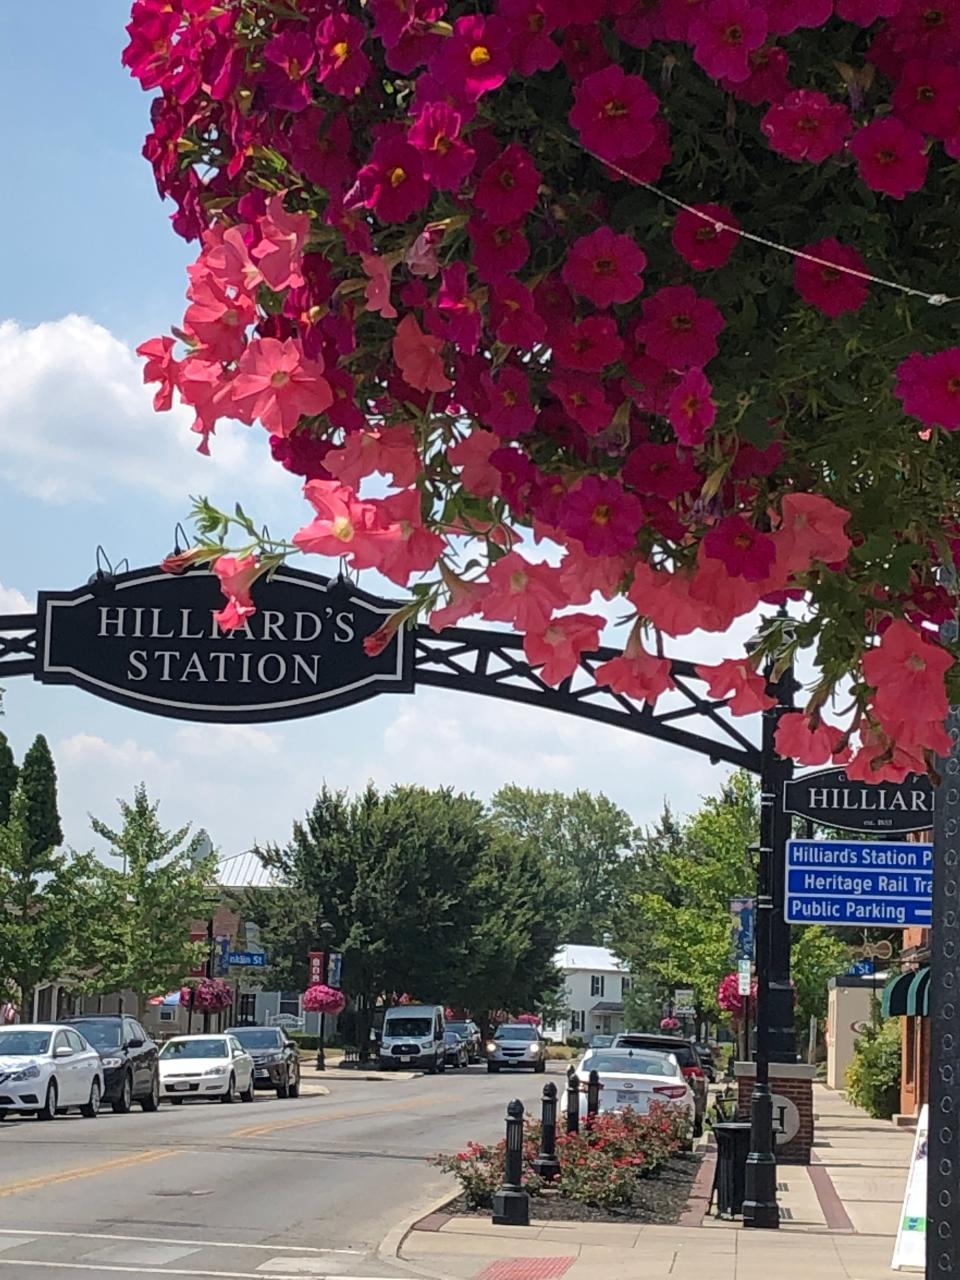 The Old Hilliard district would allow bed-and-breakfast inns and short-term rentals such as those offered by Airbnb, according to a pending ordinance before Hilliard City Council